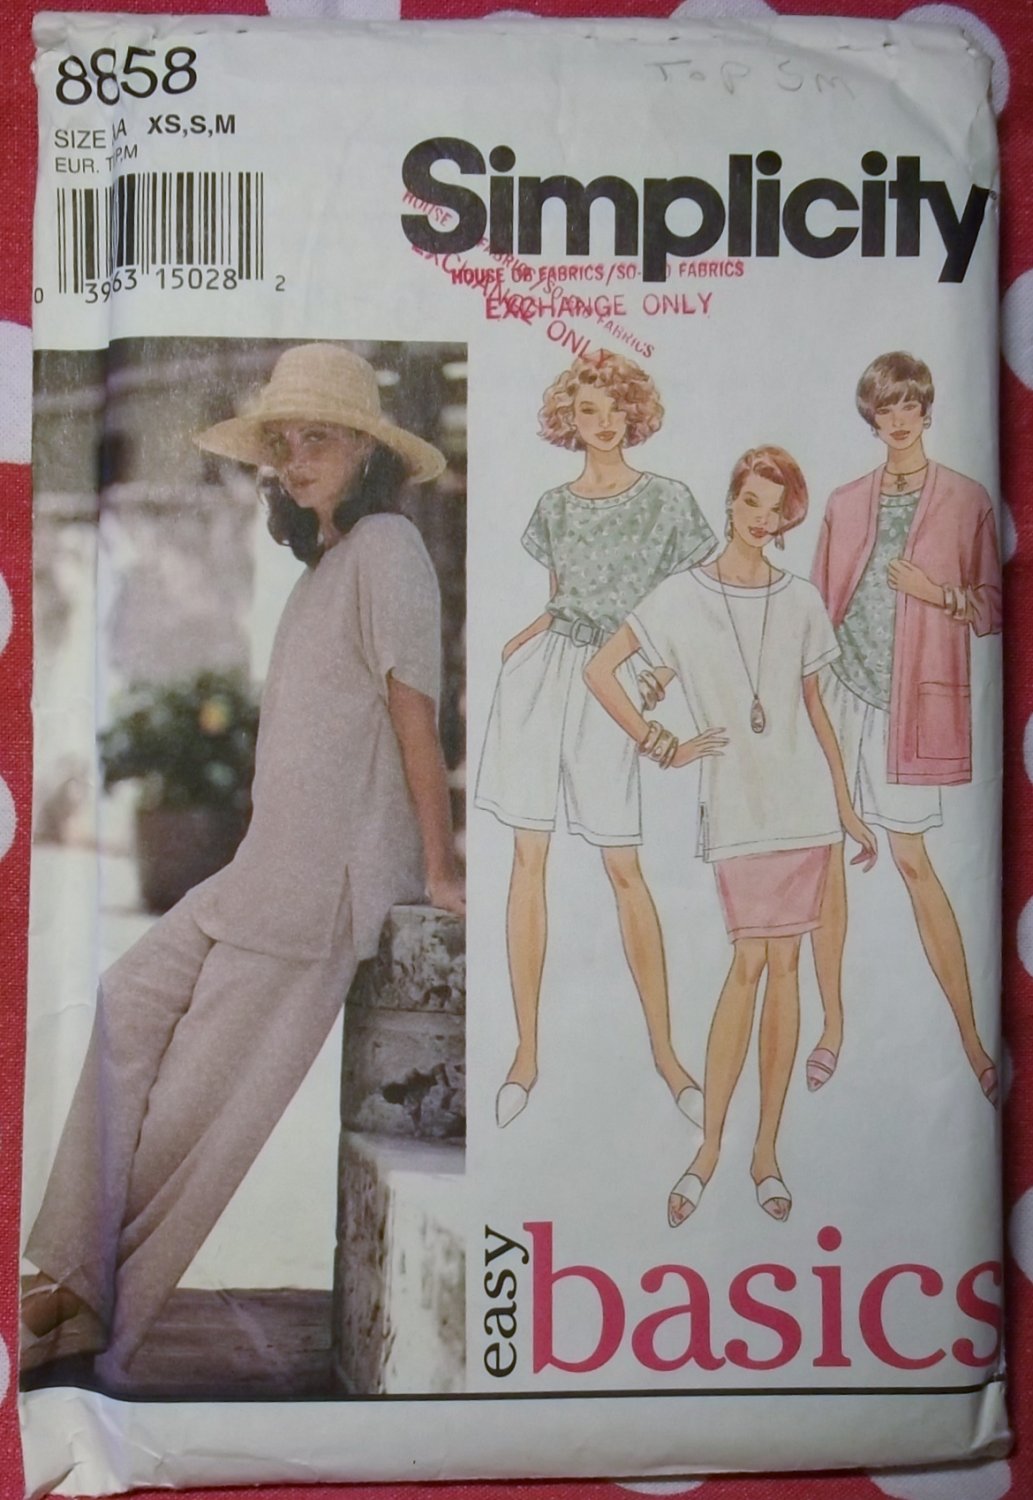 Easy Misses Basic Pants or Shorts, Skirt, Top, Cardigan Simplicity 8858 Pattern, Sz 6 to 16,